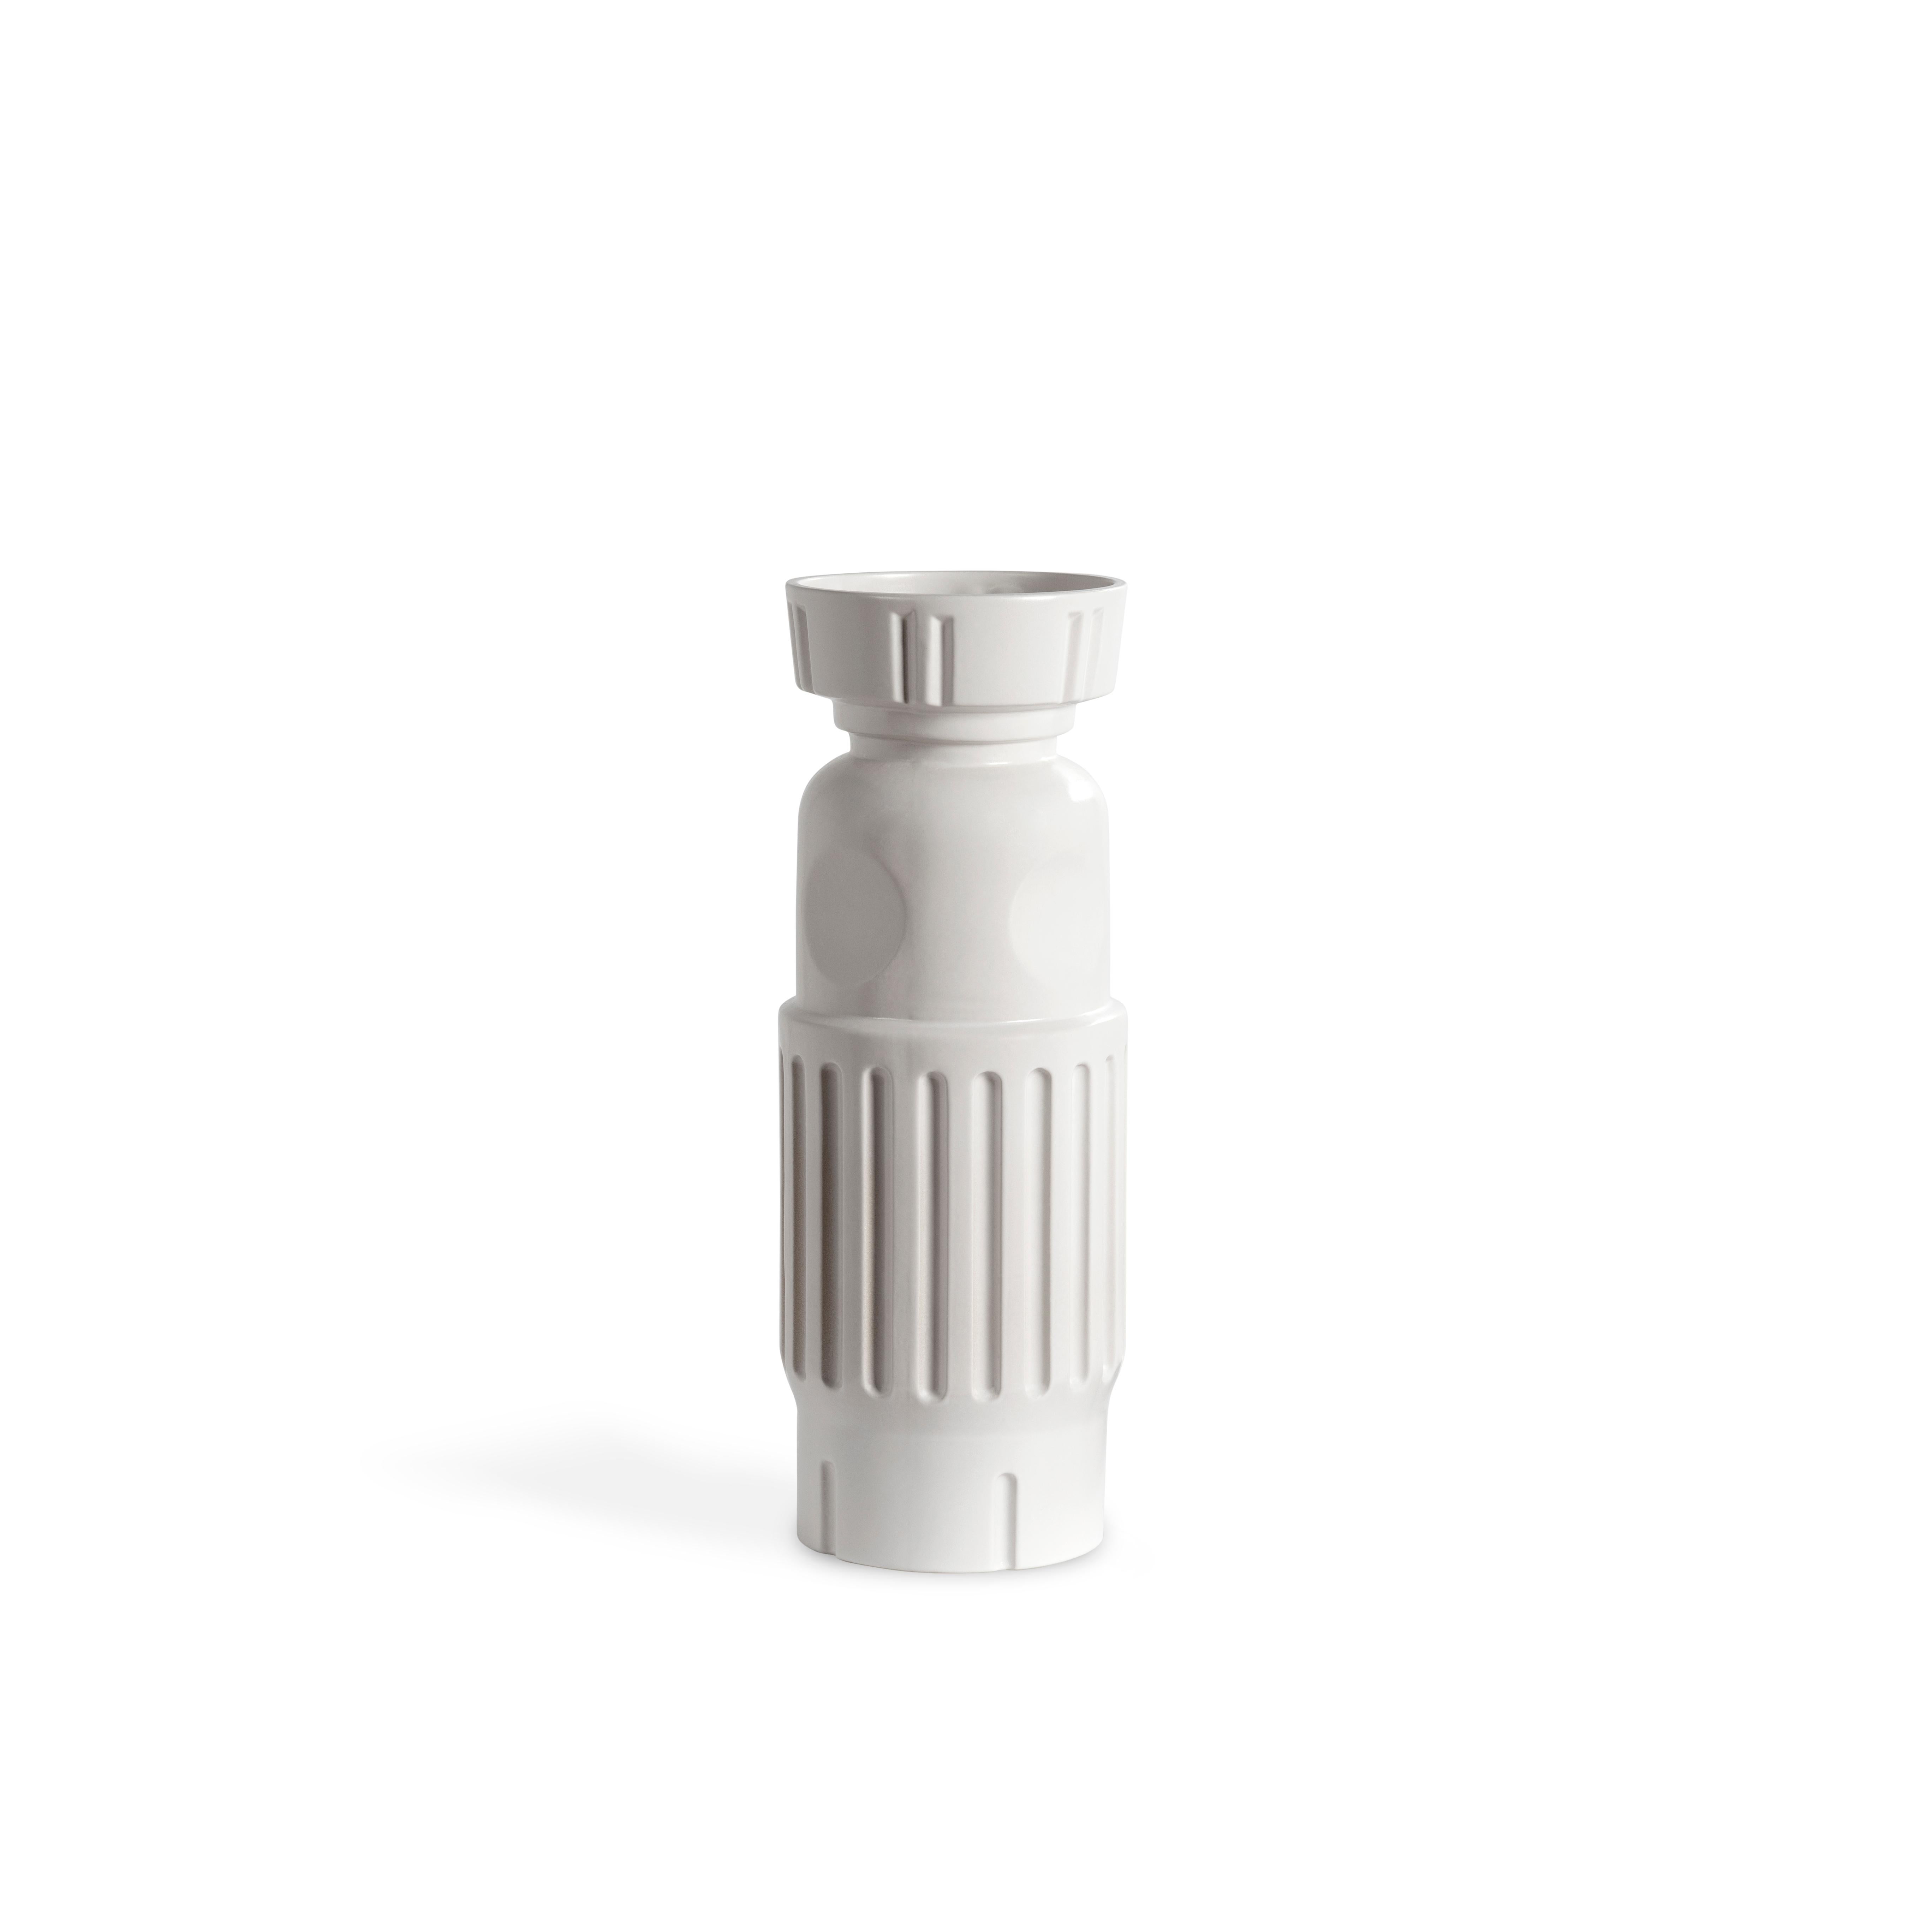 Fg 2 White Vase and Box by Pulpo
Dimensions: D14 x H40 cm
Materials: ceramic

Also available in different colours. Please contact us.

Appearing as both futuristic and an ancient relic, the fg series of ceramic objects seem to defy definition. Dutch